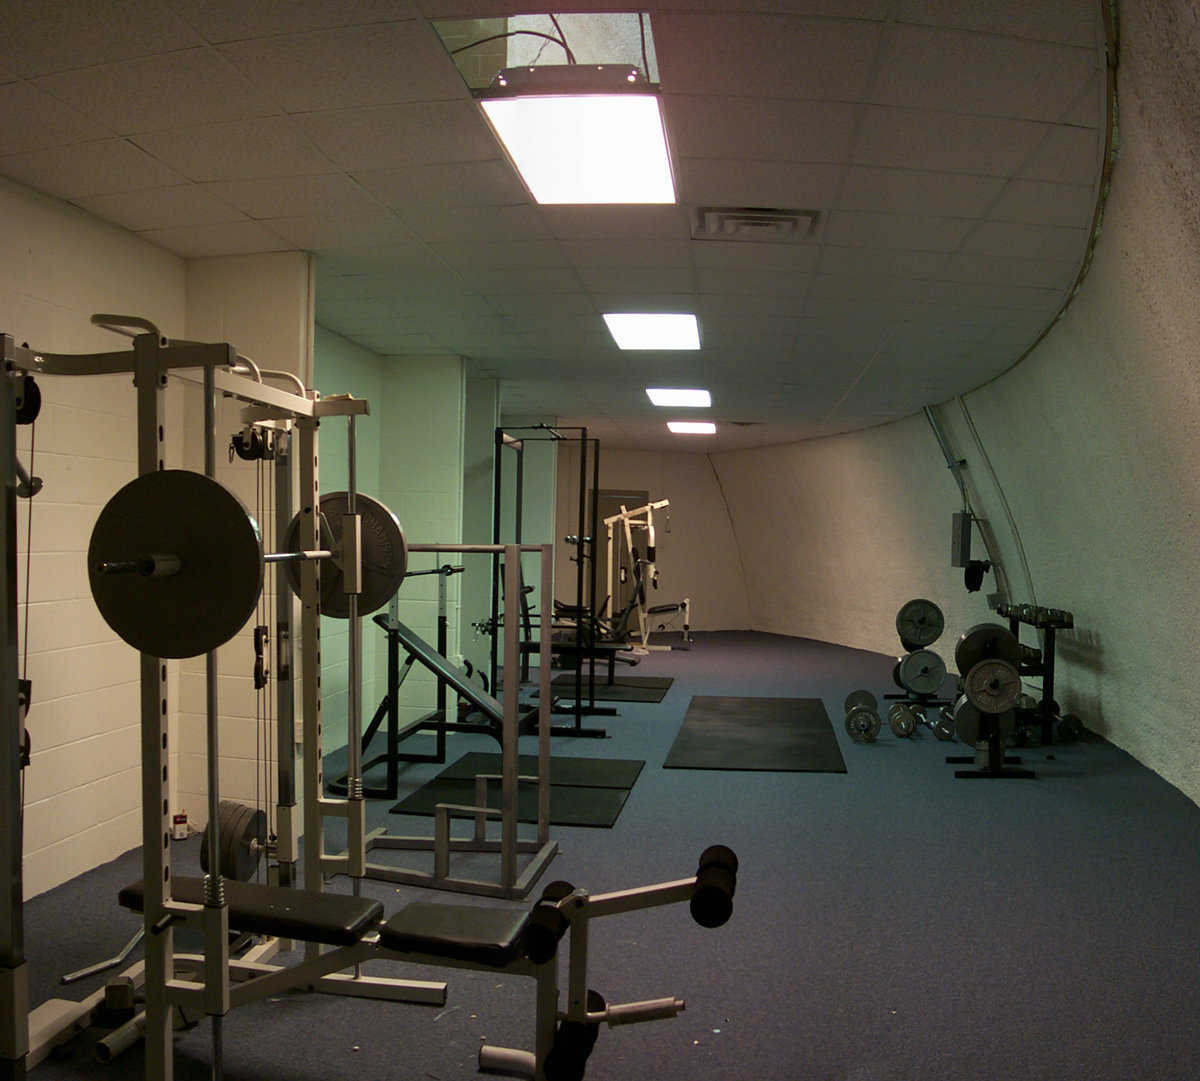 Weight lifting equipment — Well-utilized space behind the gym’s walls houses weight lifting equipment.